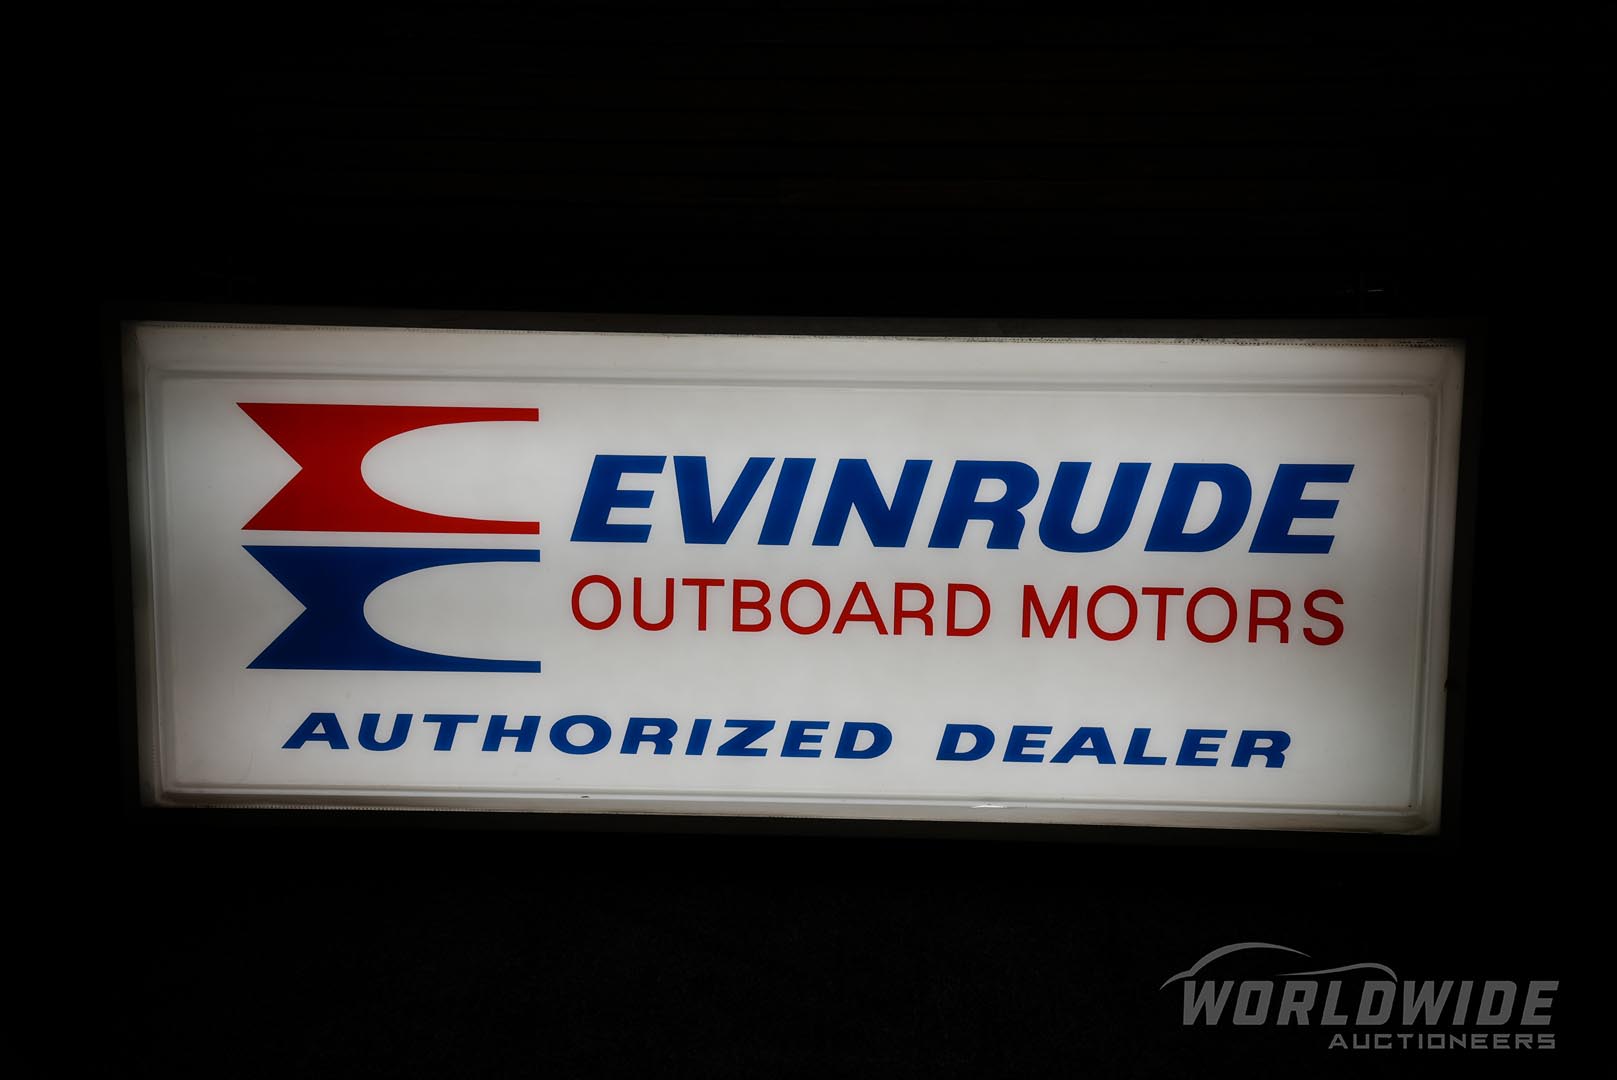 Evinrude Outboard Motors Authorized Dealer Lighted Sign